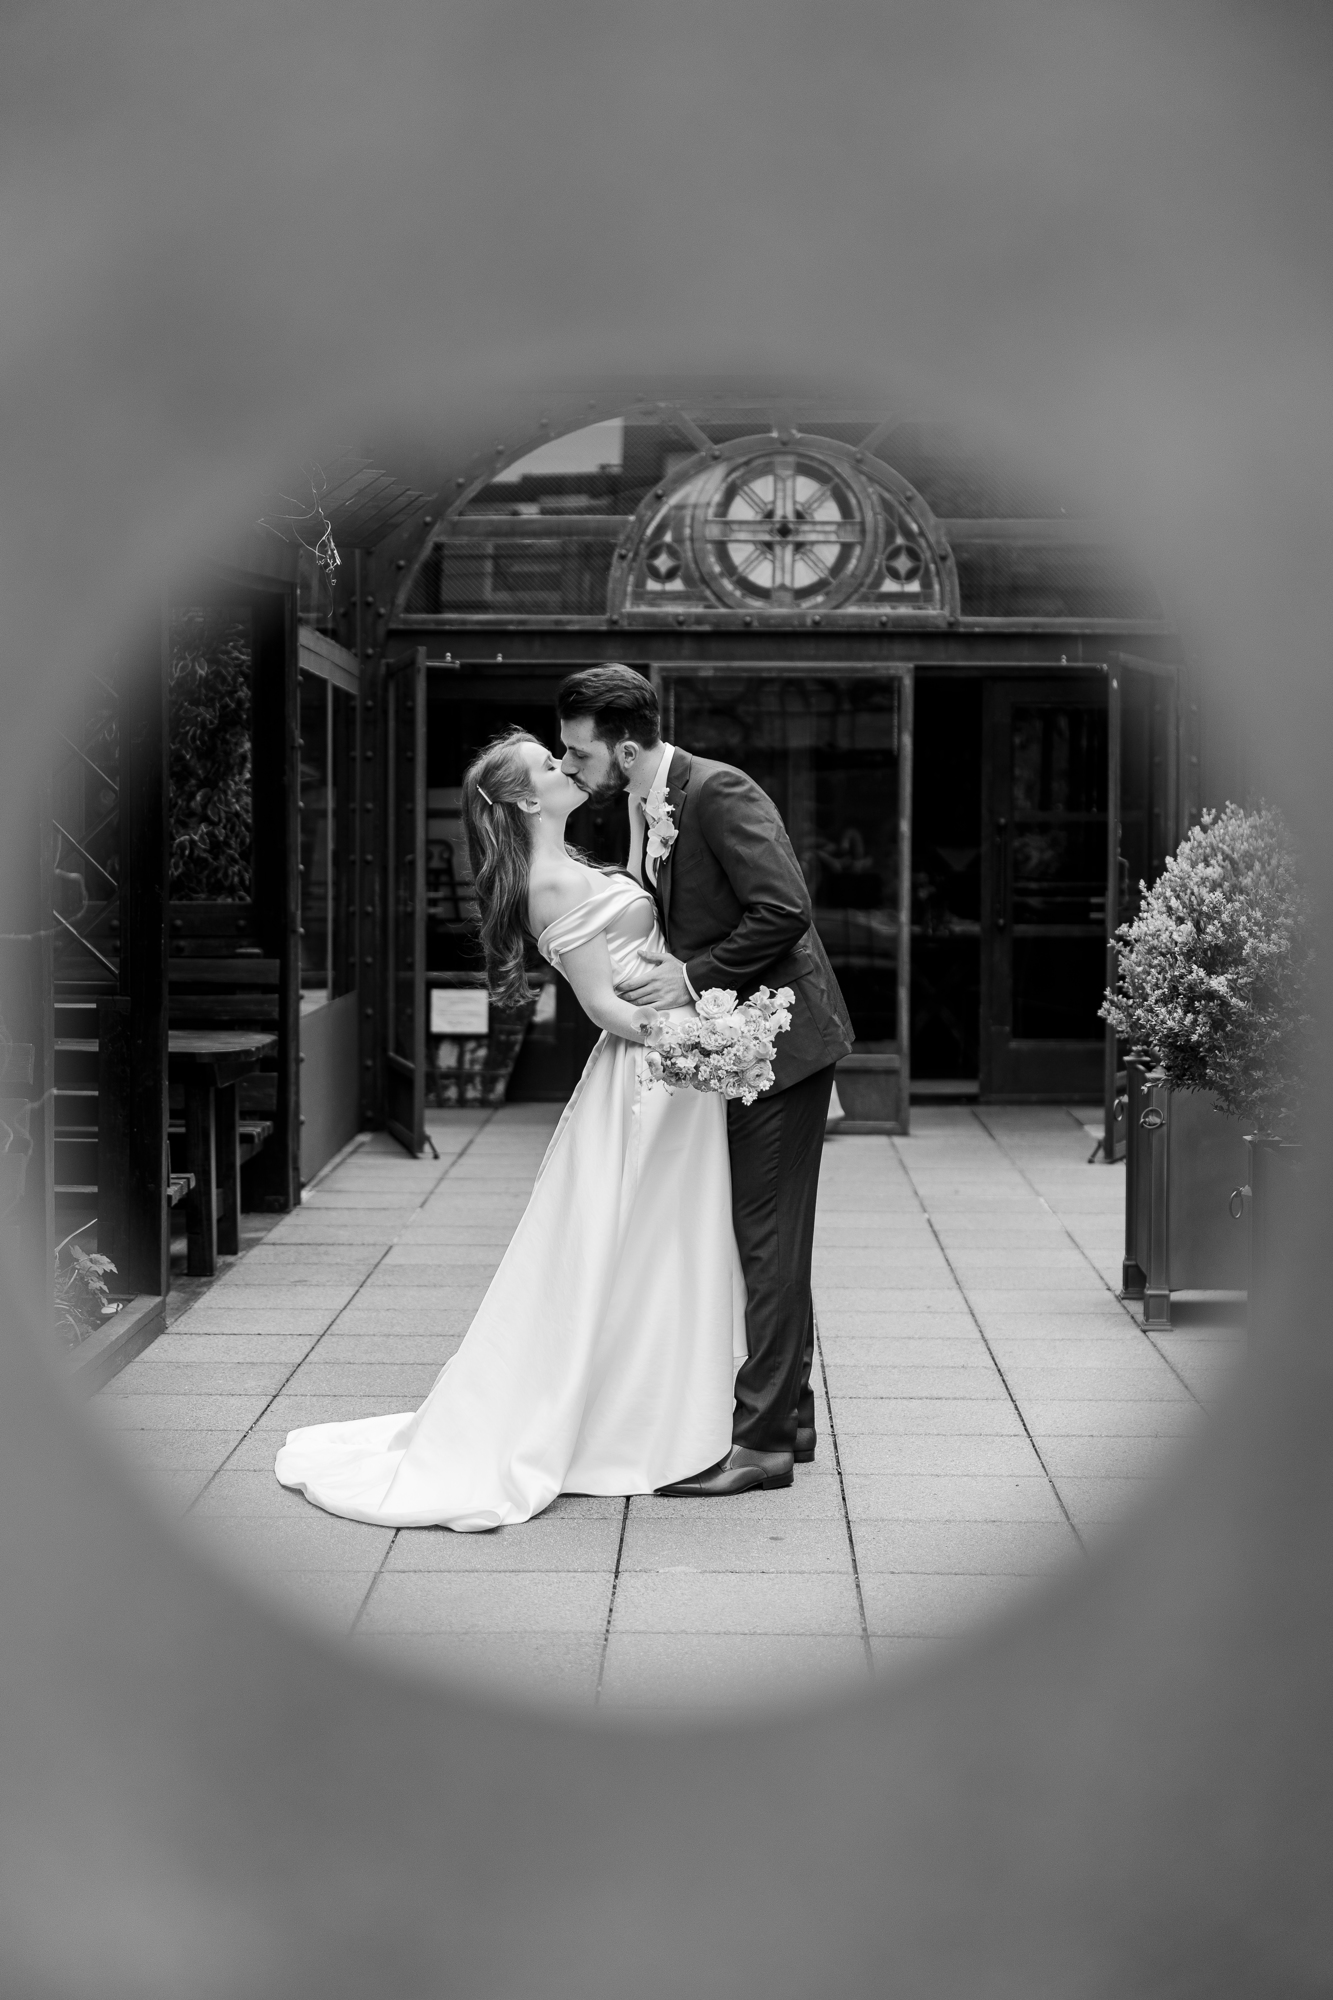 Authentic Wedding Photos At MyMoon